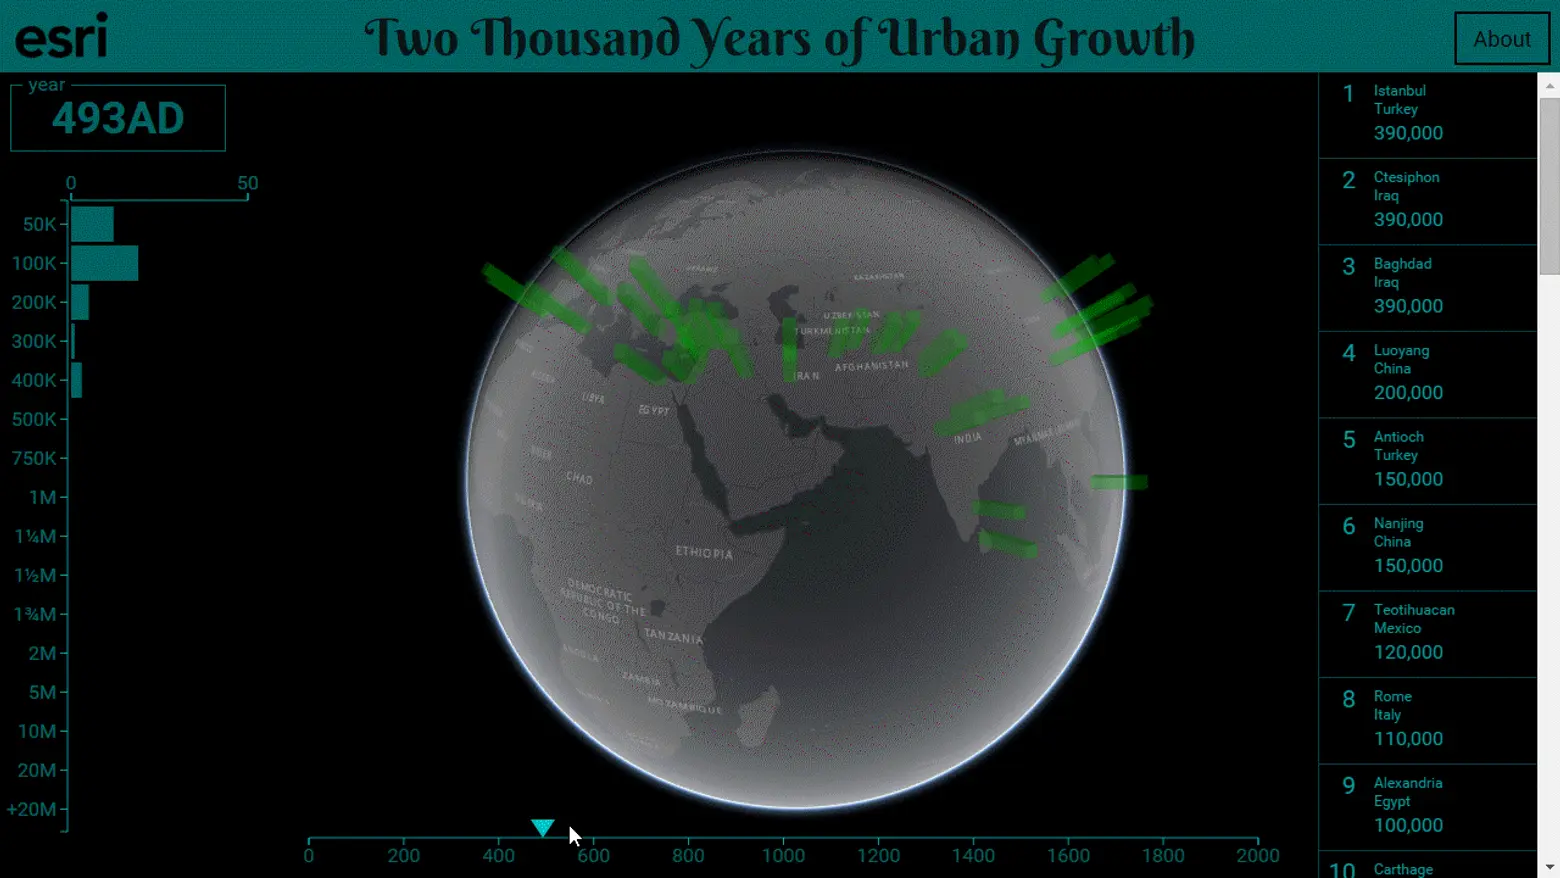 MAP: See the World’s Urban Population Grow Over 2,000 Years